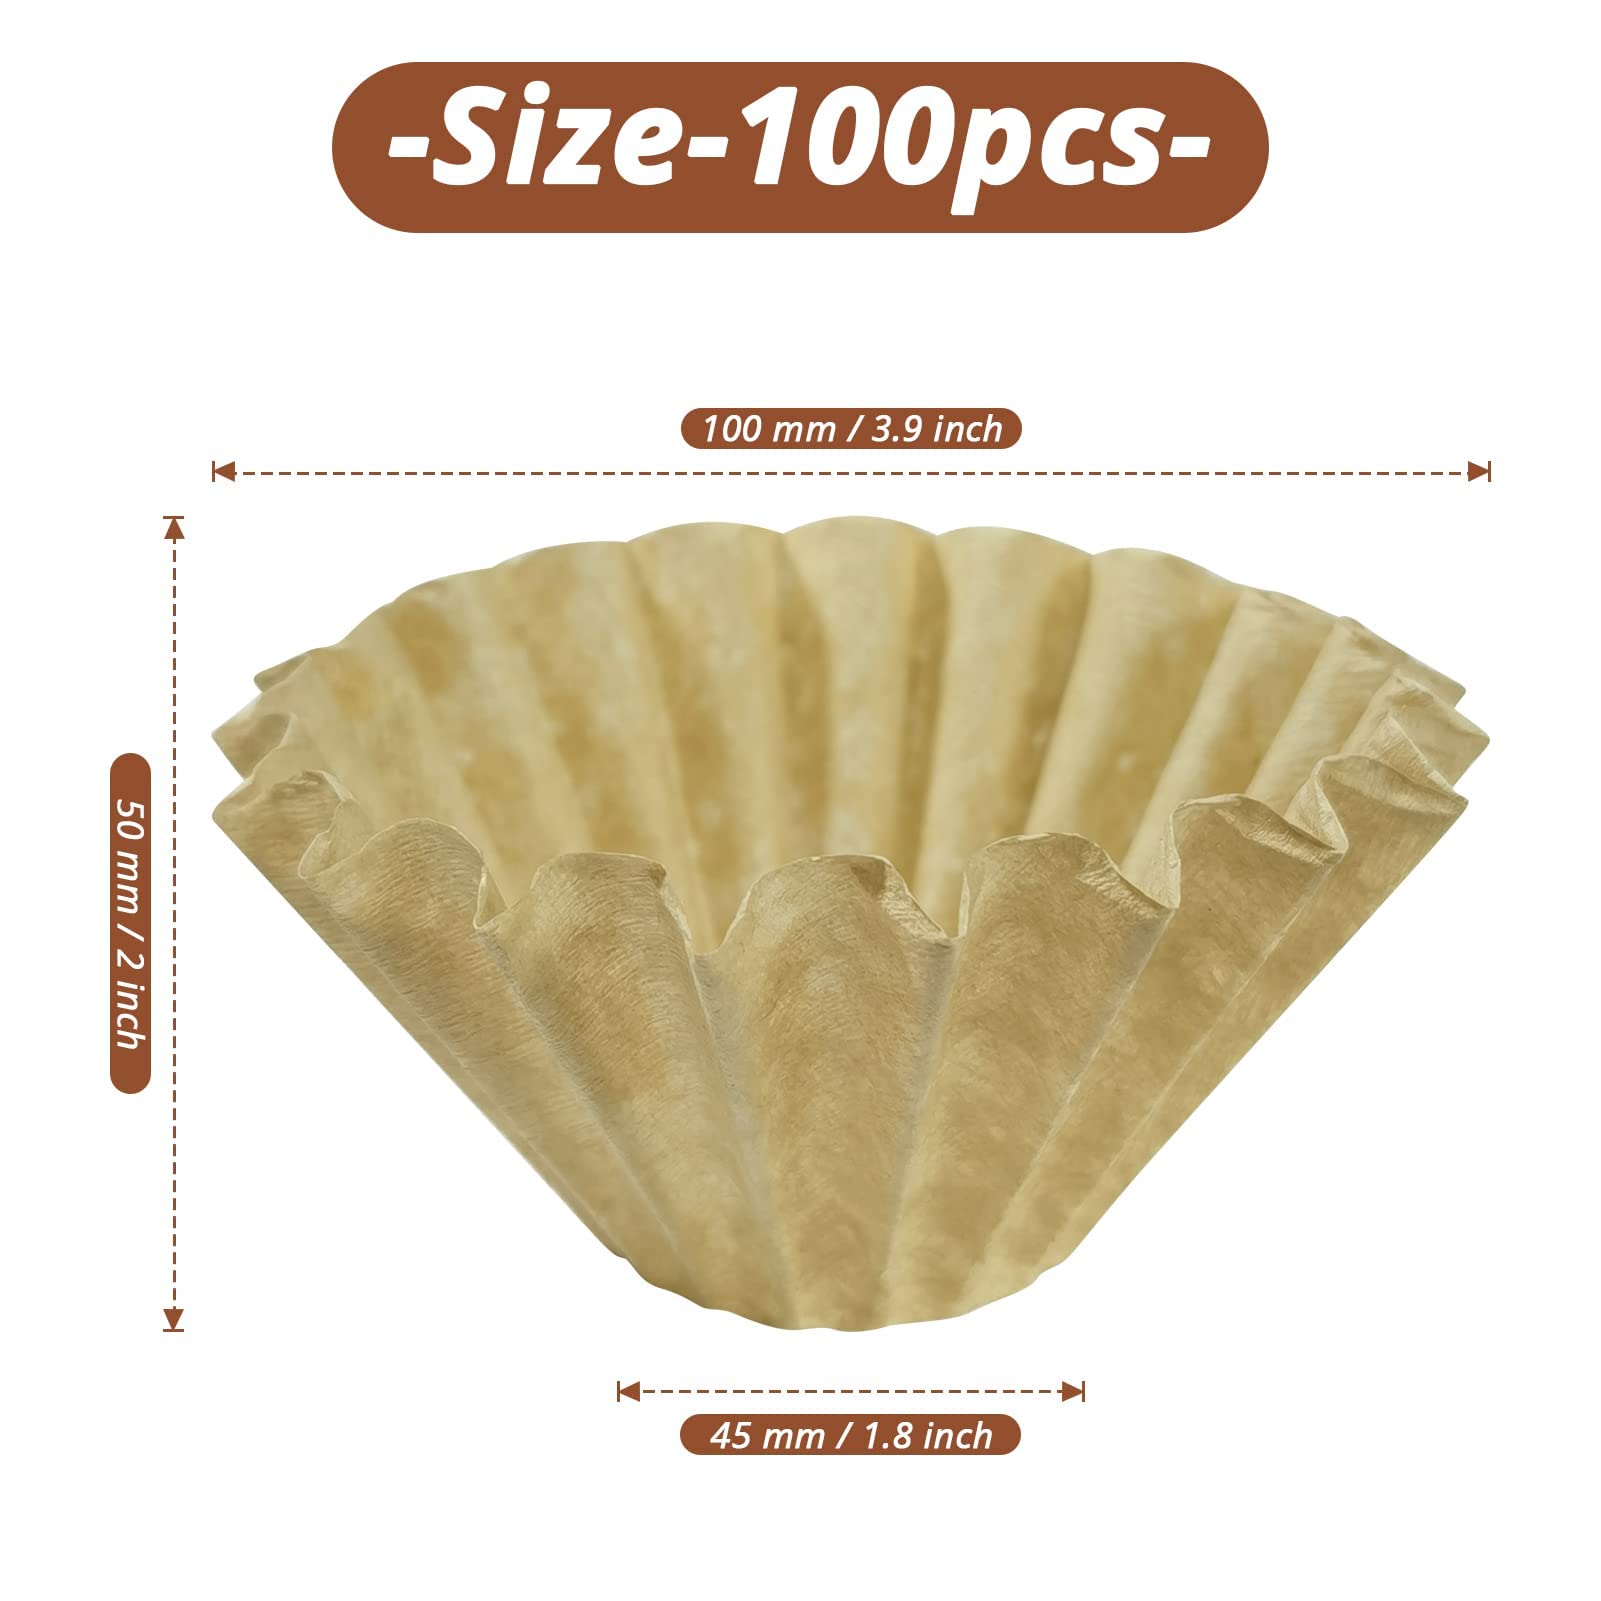 Sihuuu 100 Pcs Coffee Filters, 1-4 Cup Basket Coffee Filters, Natural Brown Unbleached Basket Filters Paper for Home, Office Single Cup Coffee Filter